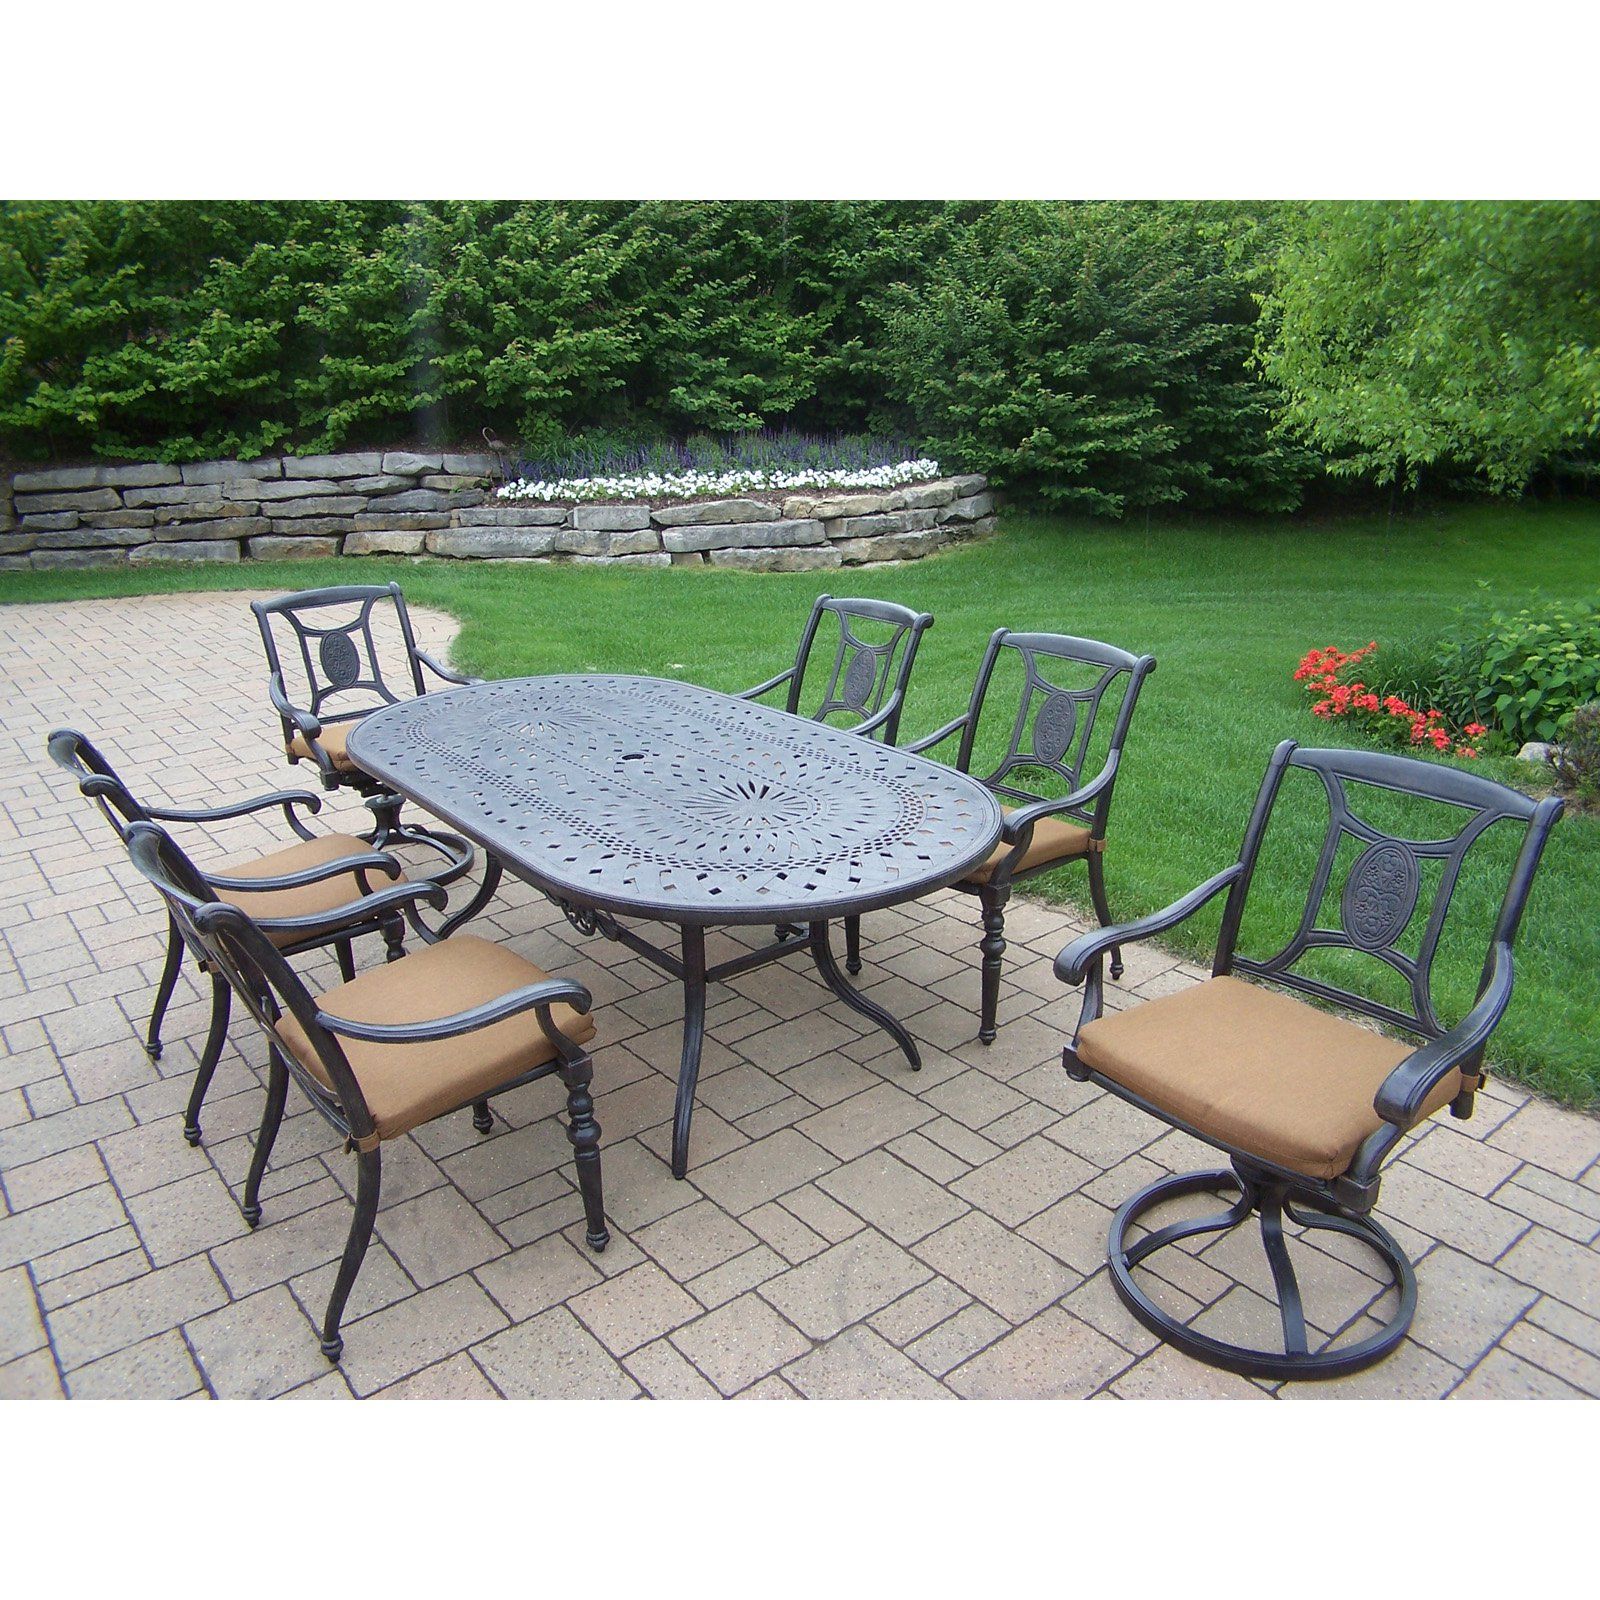 Widely Used Oval 7 Piece Outdoor Patio Dining Sets Within Oakland Living Victoria Aluminum 7 Piece Oval Patio Dining Set (View 8 of 15)